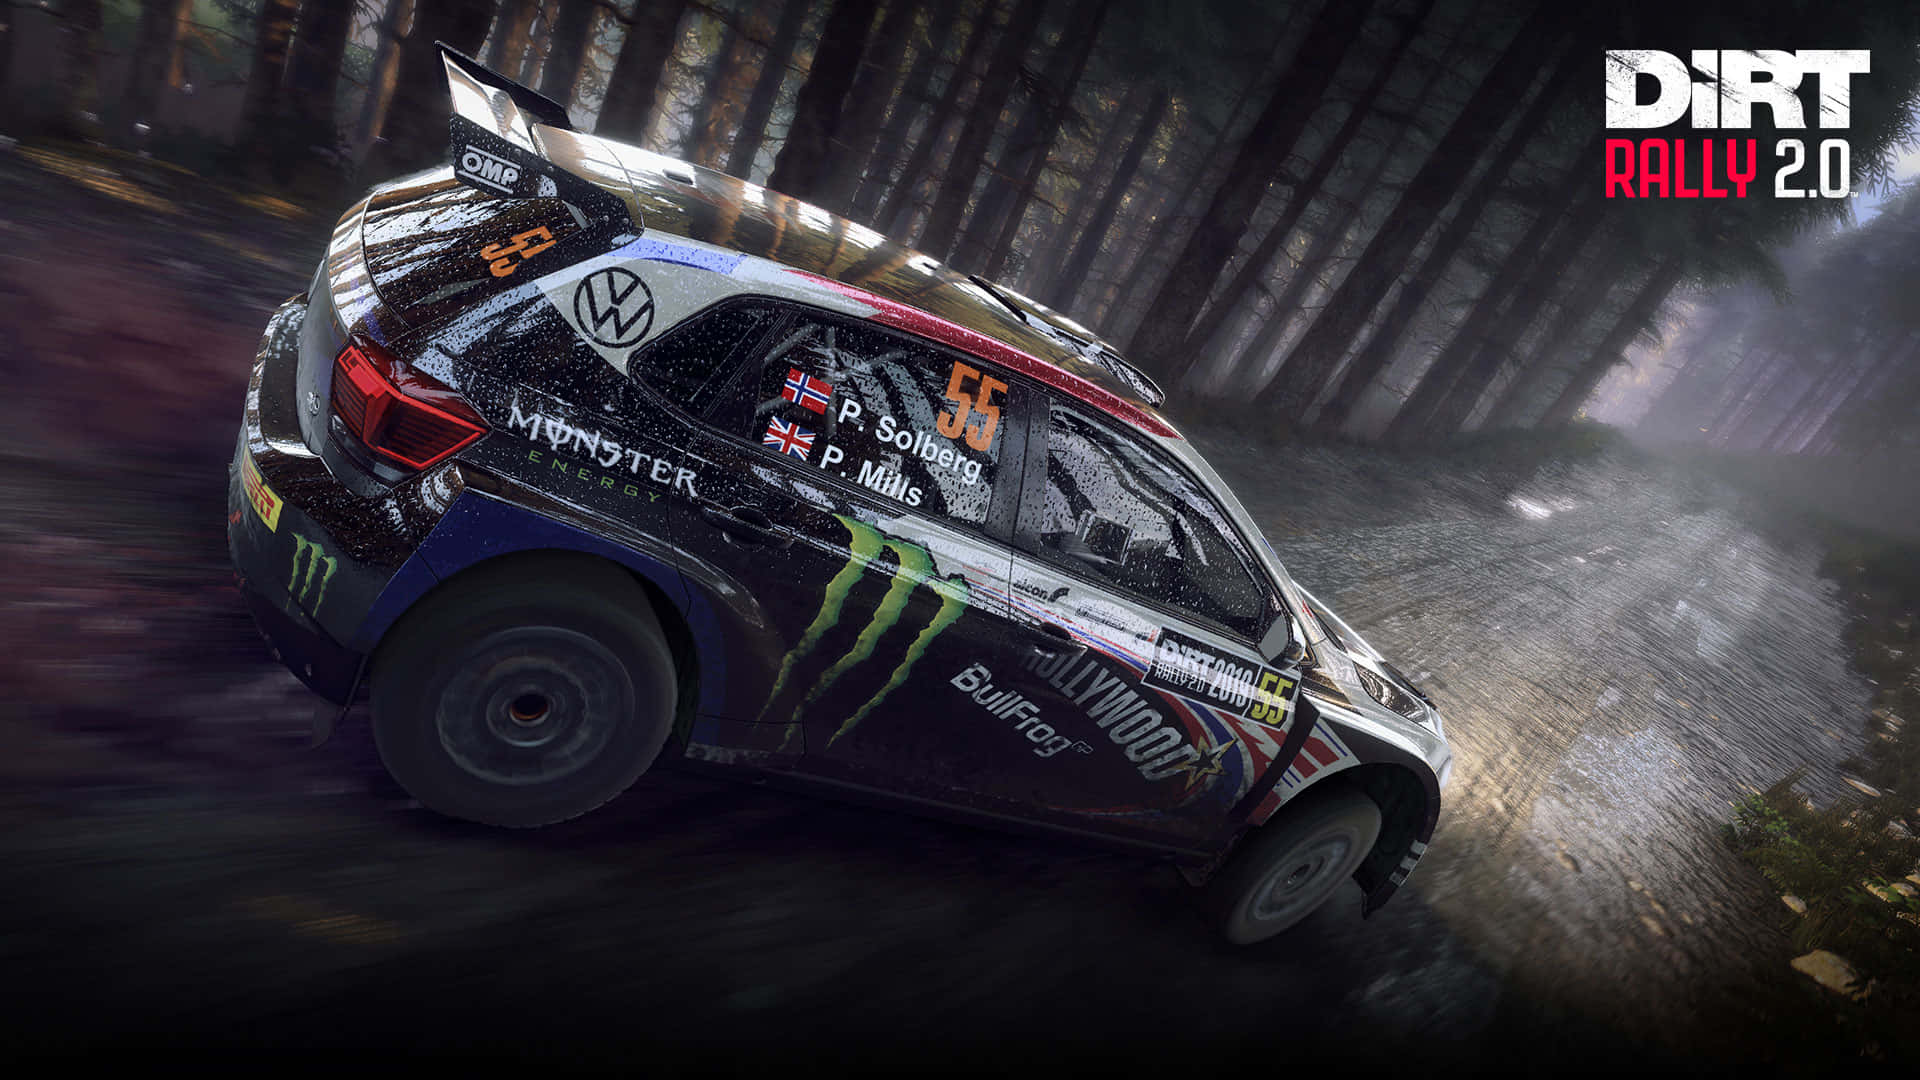 ”Be Prepared: Get Ready with Dirt Rally”